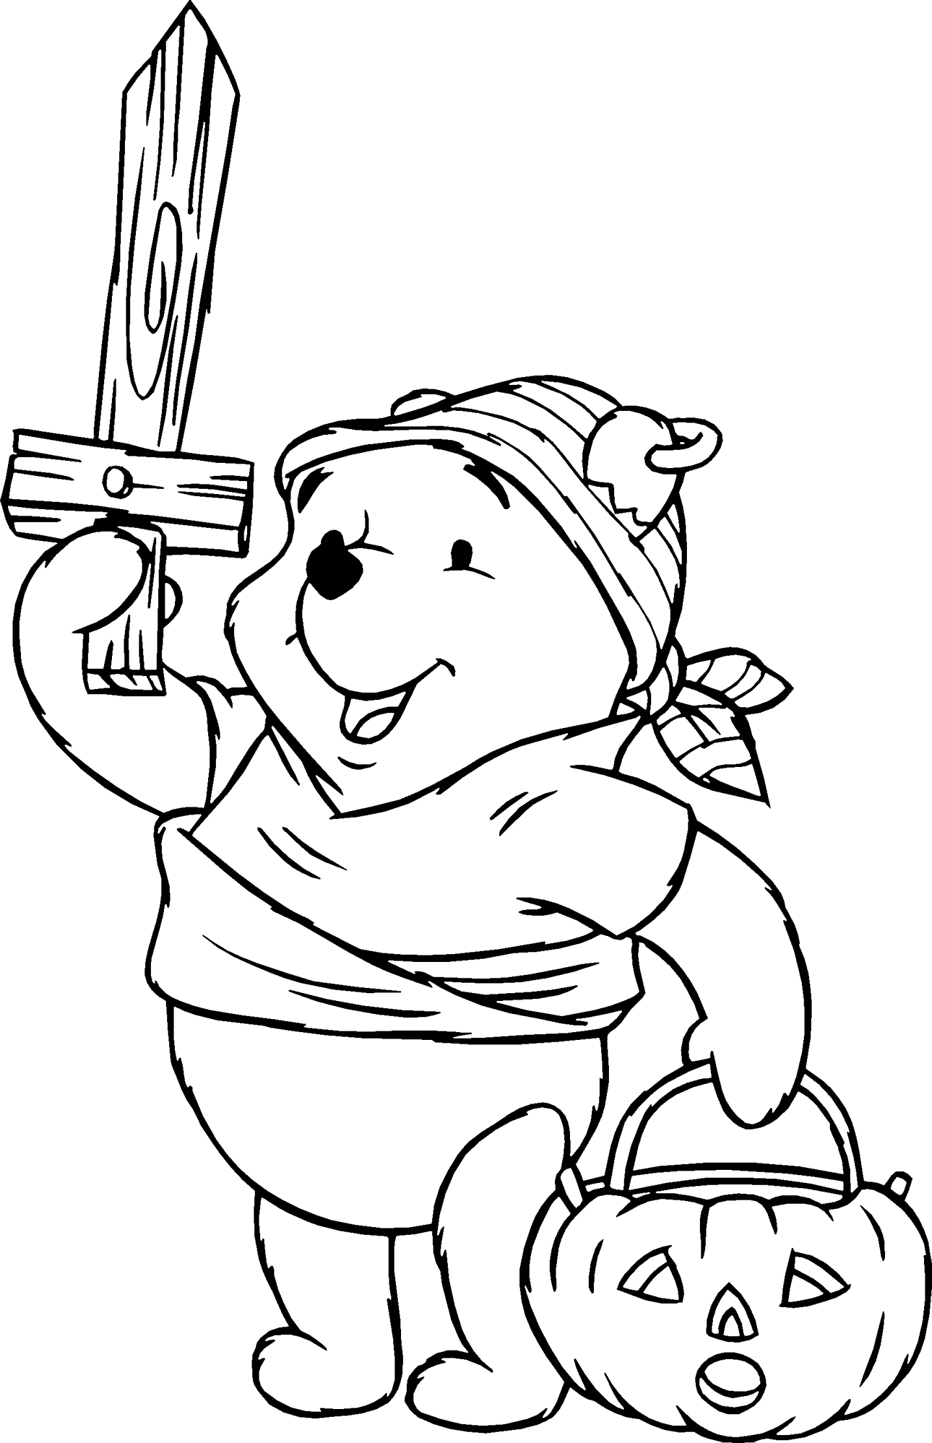 25+ winnie the pooh valentines day coloring pages Winnie the pooh coloring pages